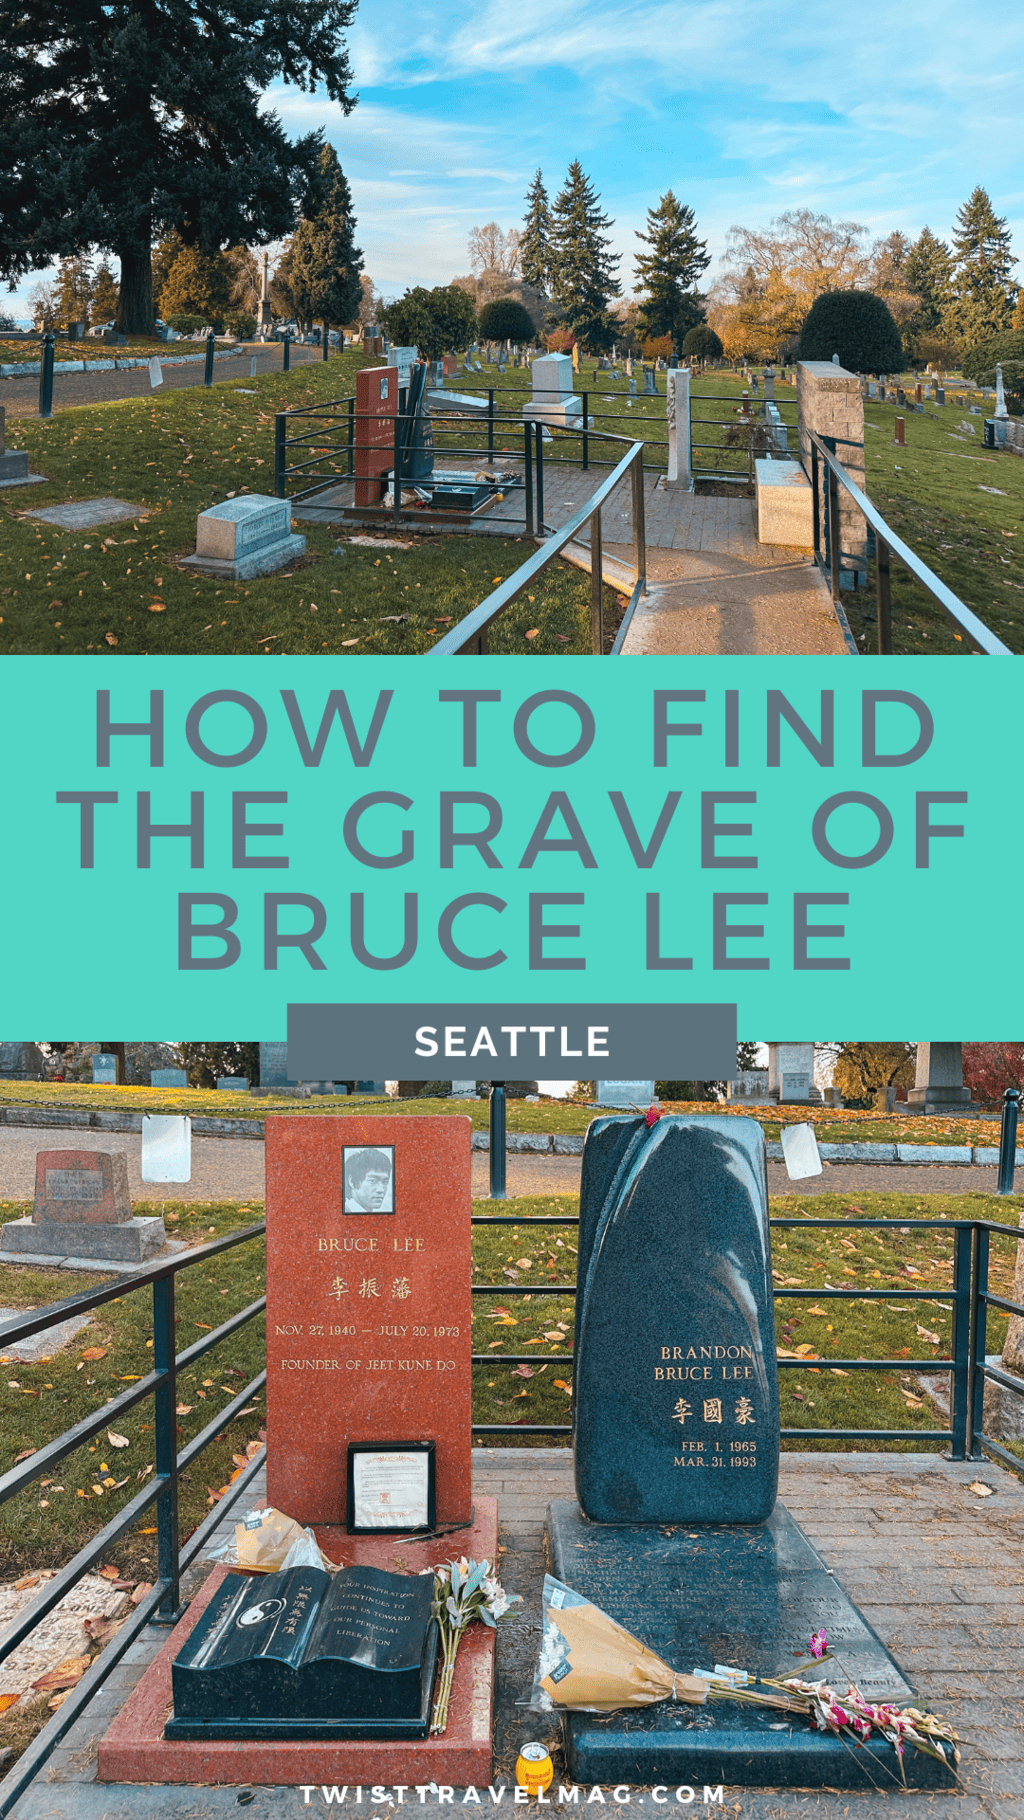 How to find the grave of bruce lee